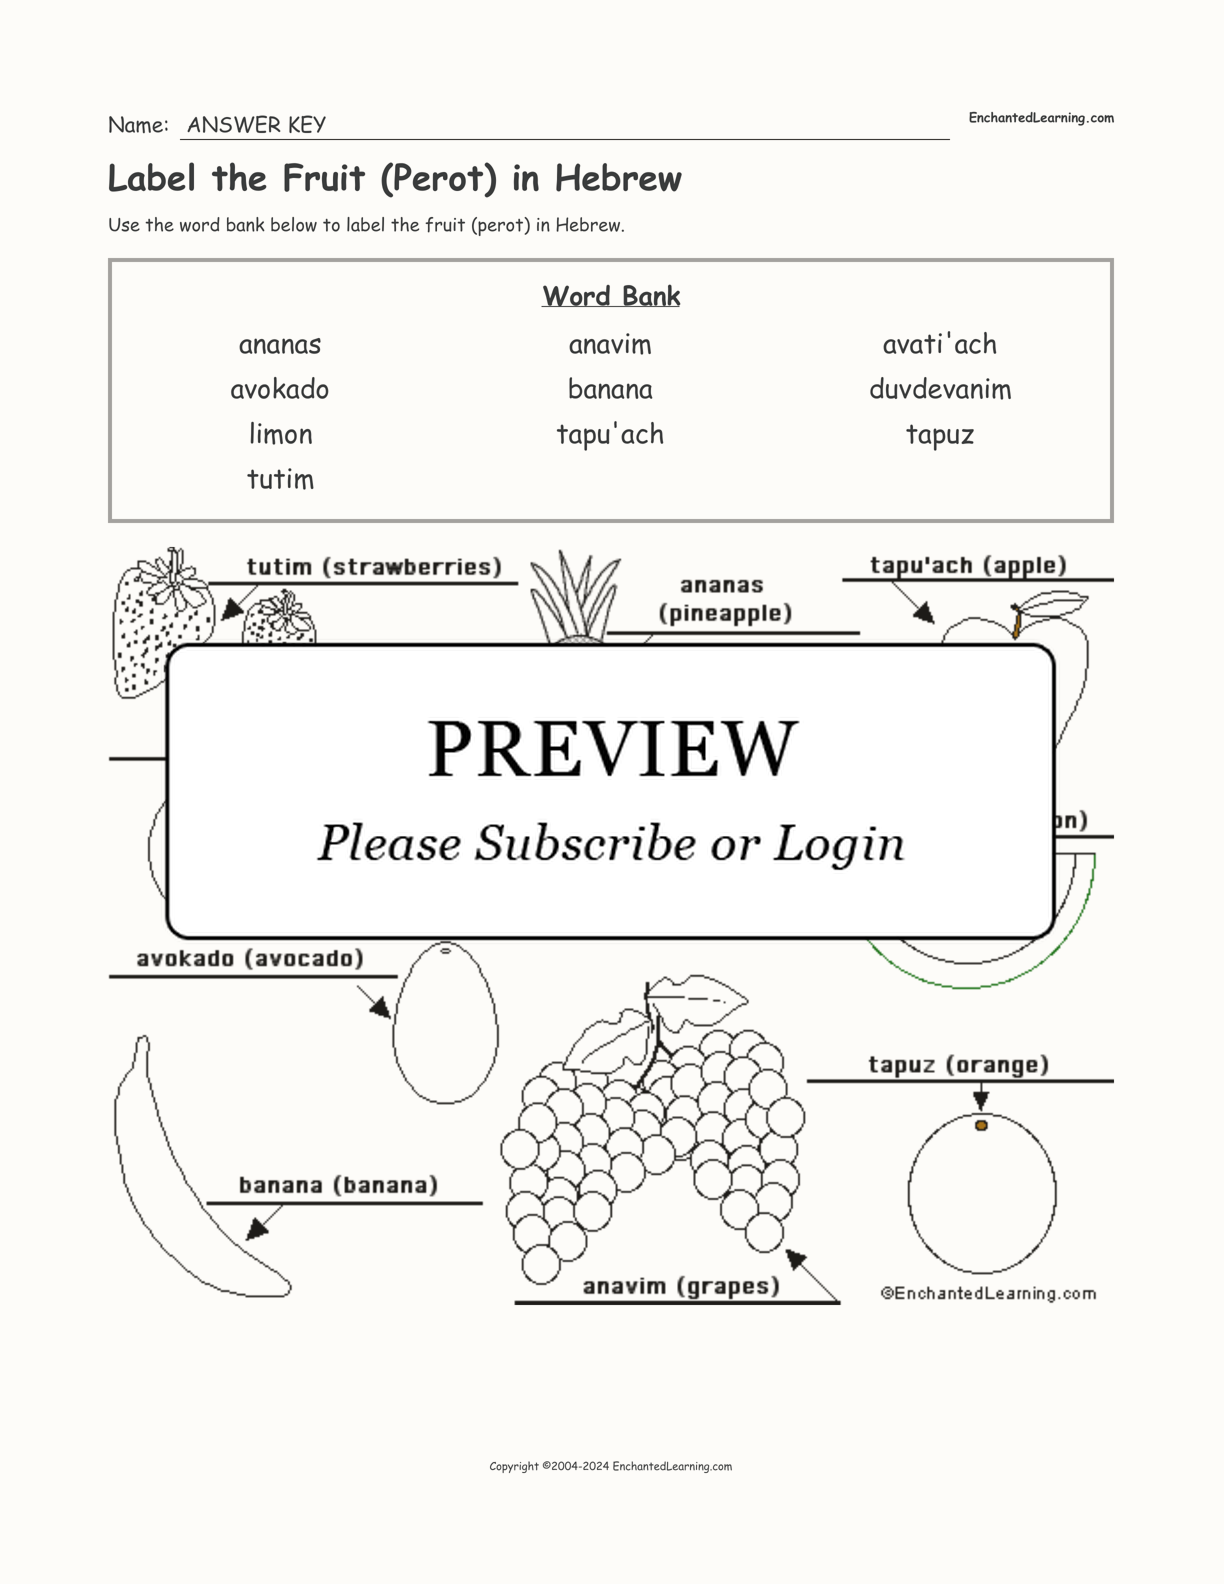 Label the Fruit (Perot) in Hebrew interactive worksheet page 2